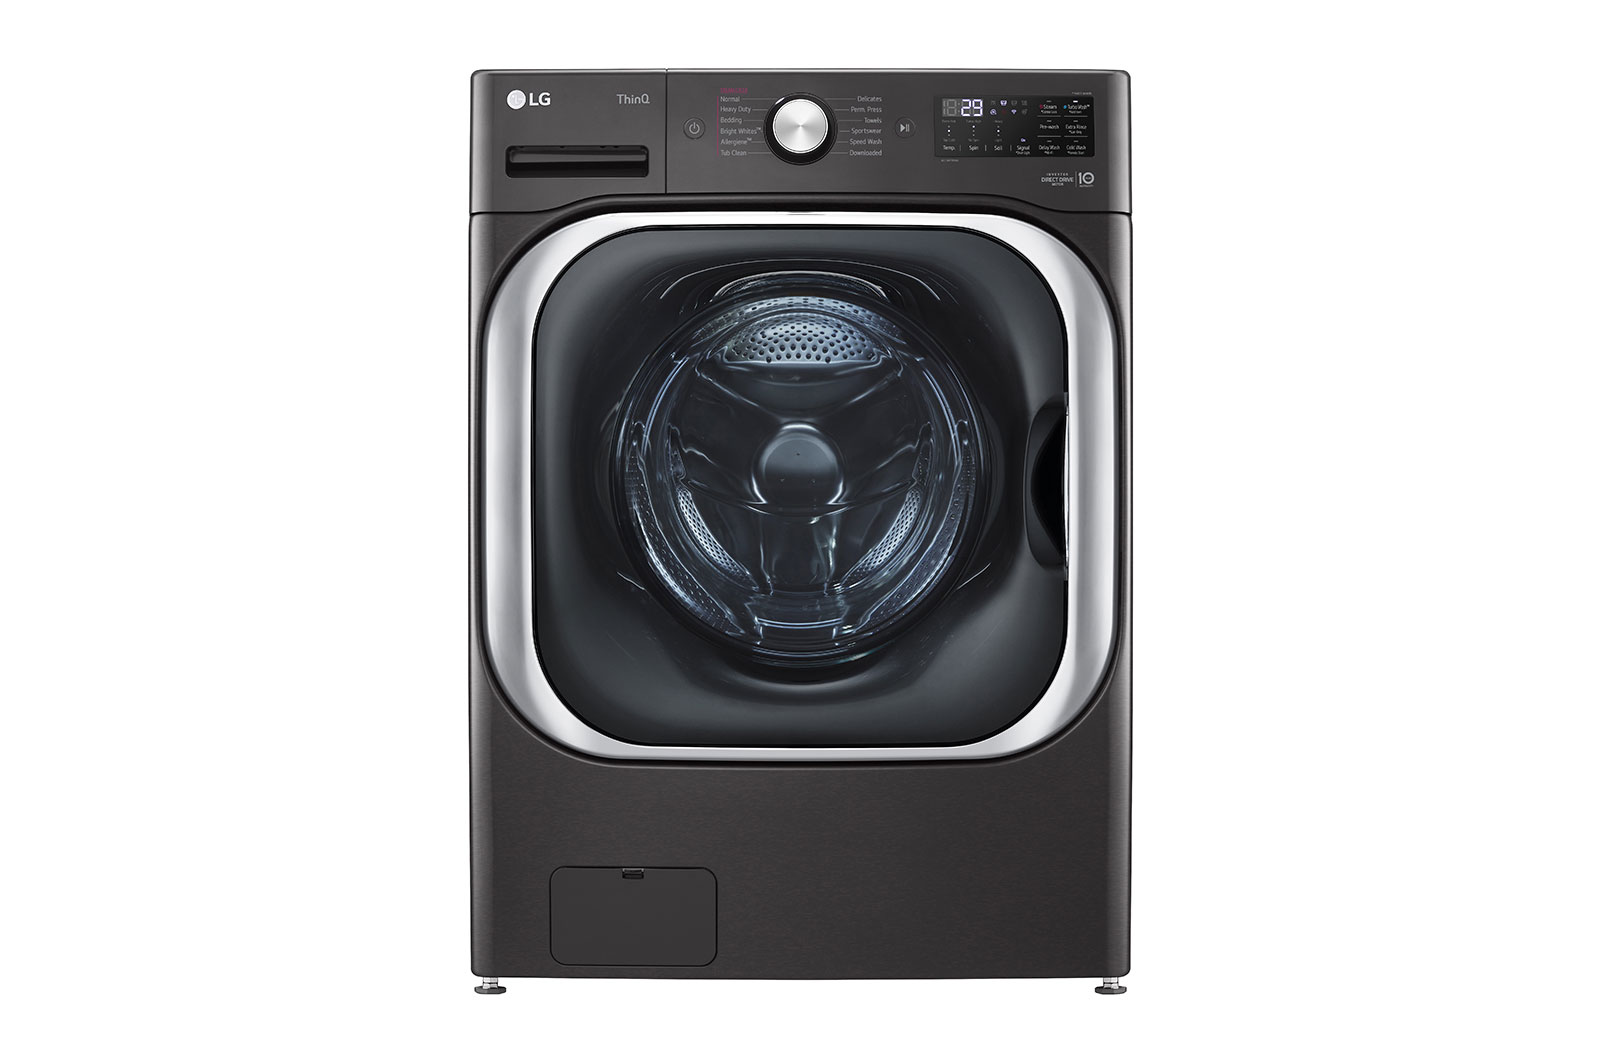 LG 6.0 cu. ft. Mega Capacity Smart wi-fi Enabled Front Load Washer with TurboWash® and Built-In Intelligence, WM8900HBA